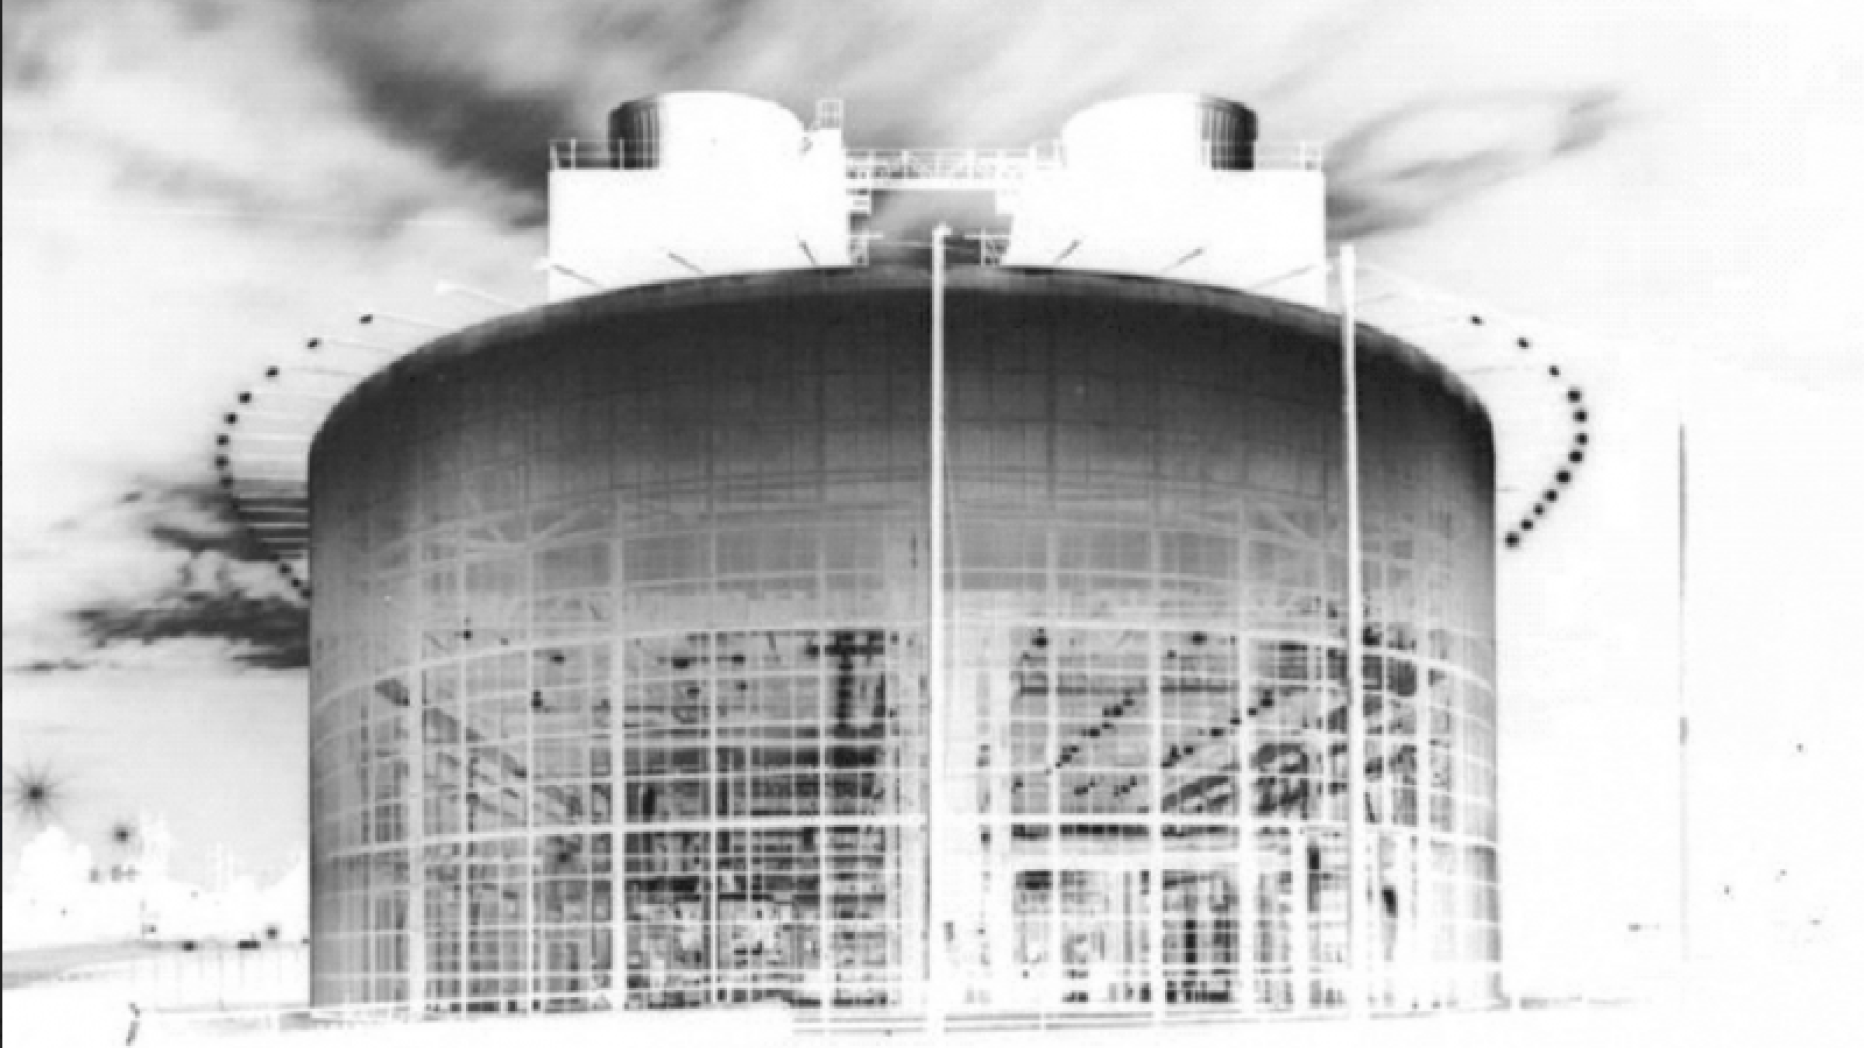 Computer image of large cylindrical building.